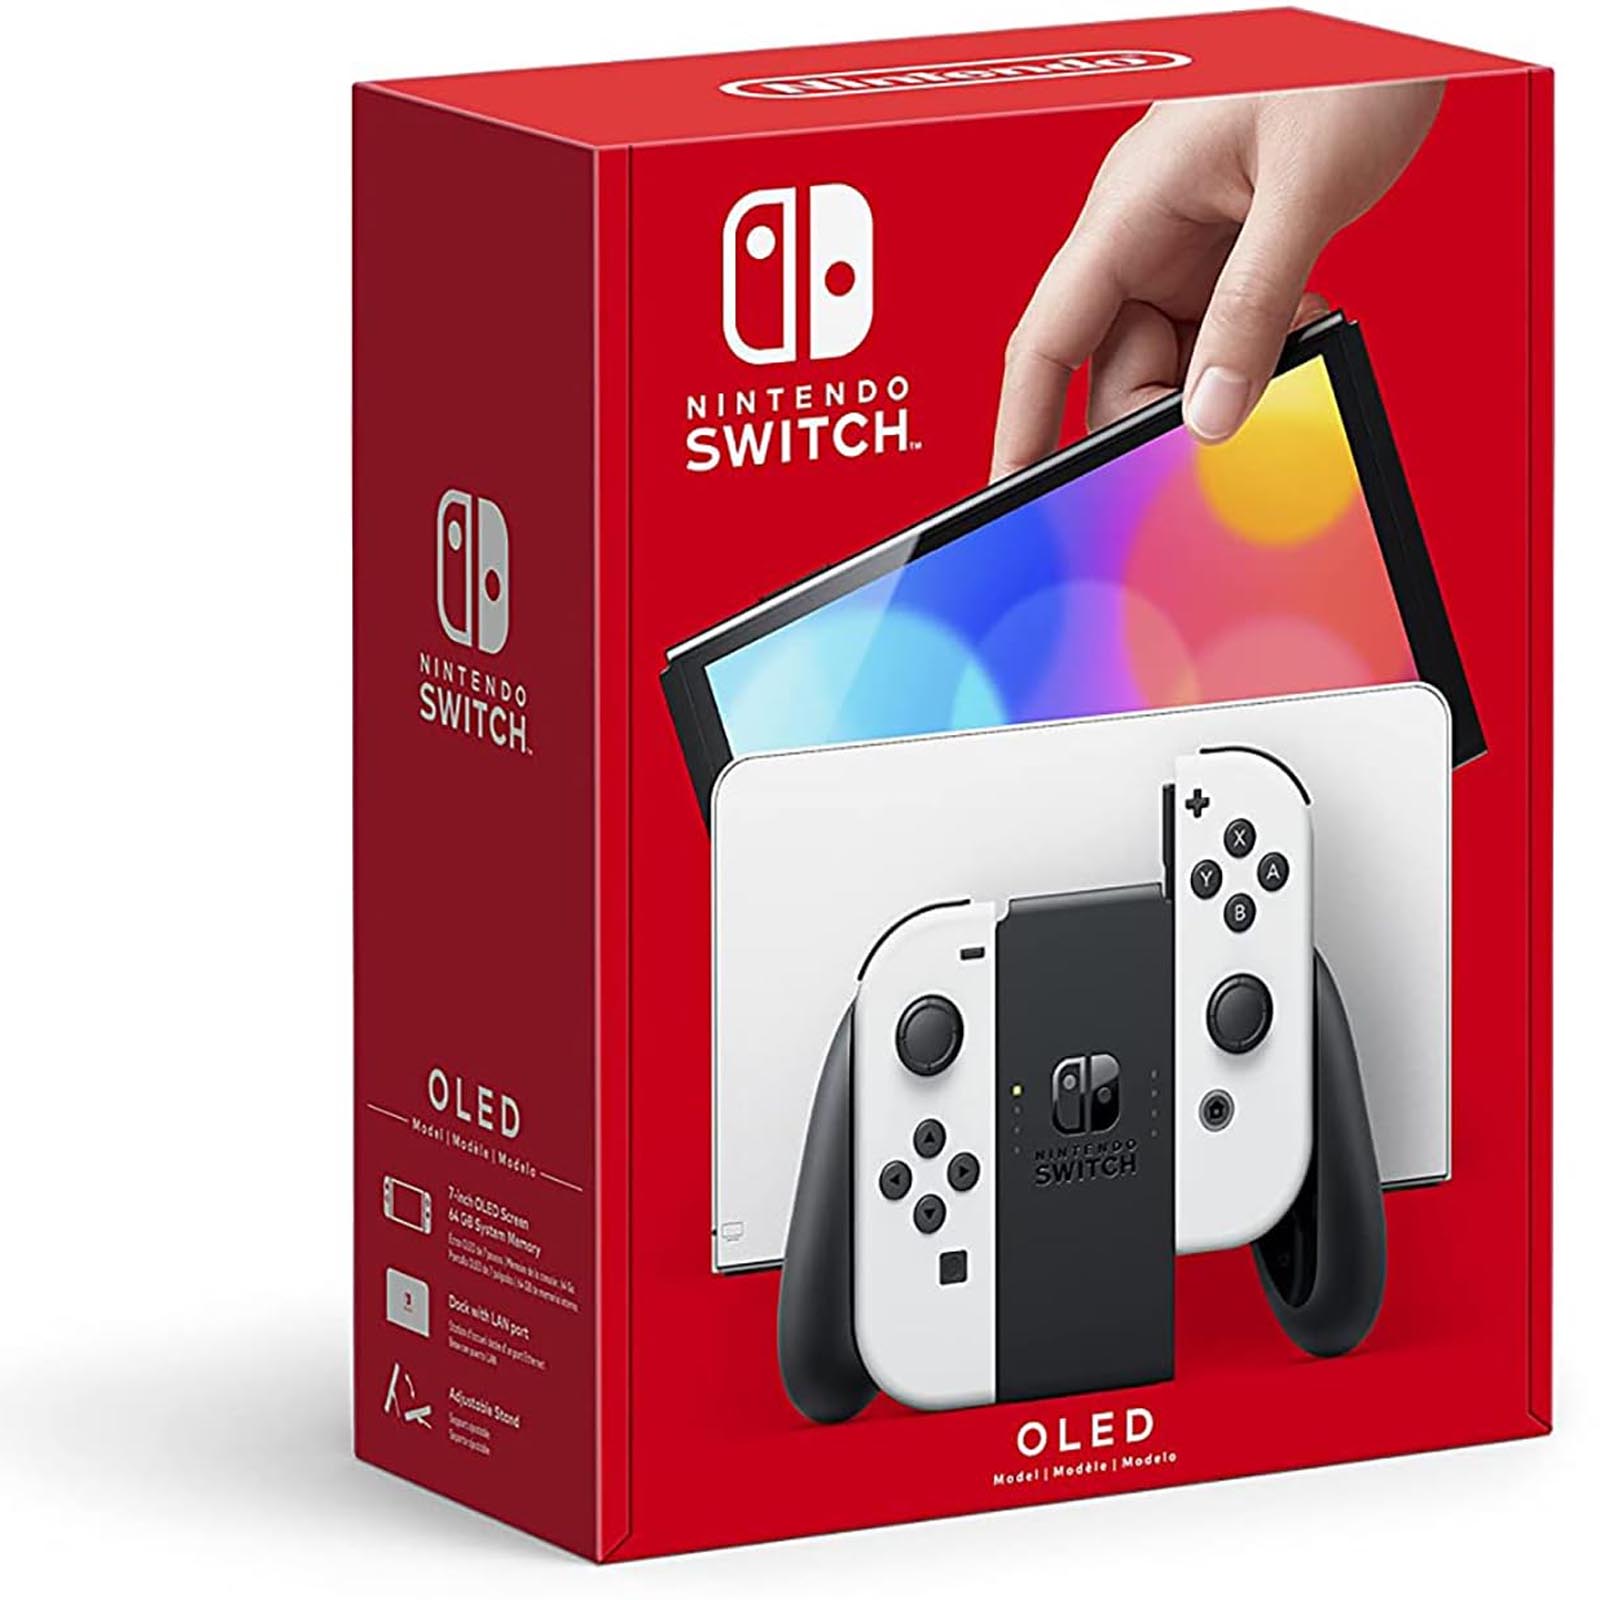 Nintendo Switch OLED with Joy-Con White and Black 128GB MEMORY CARD 15 Games Inbuilt